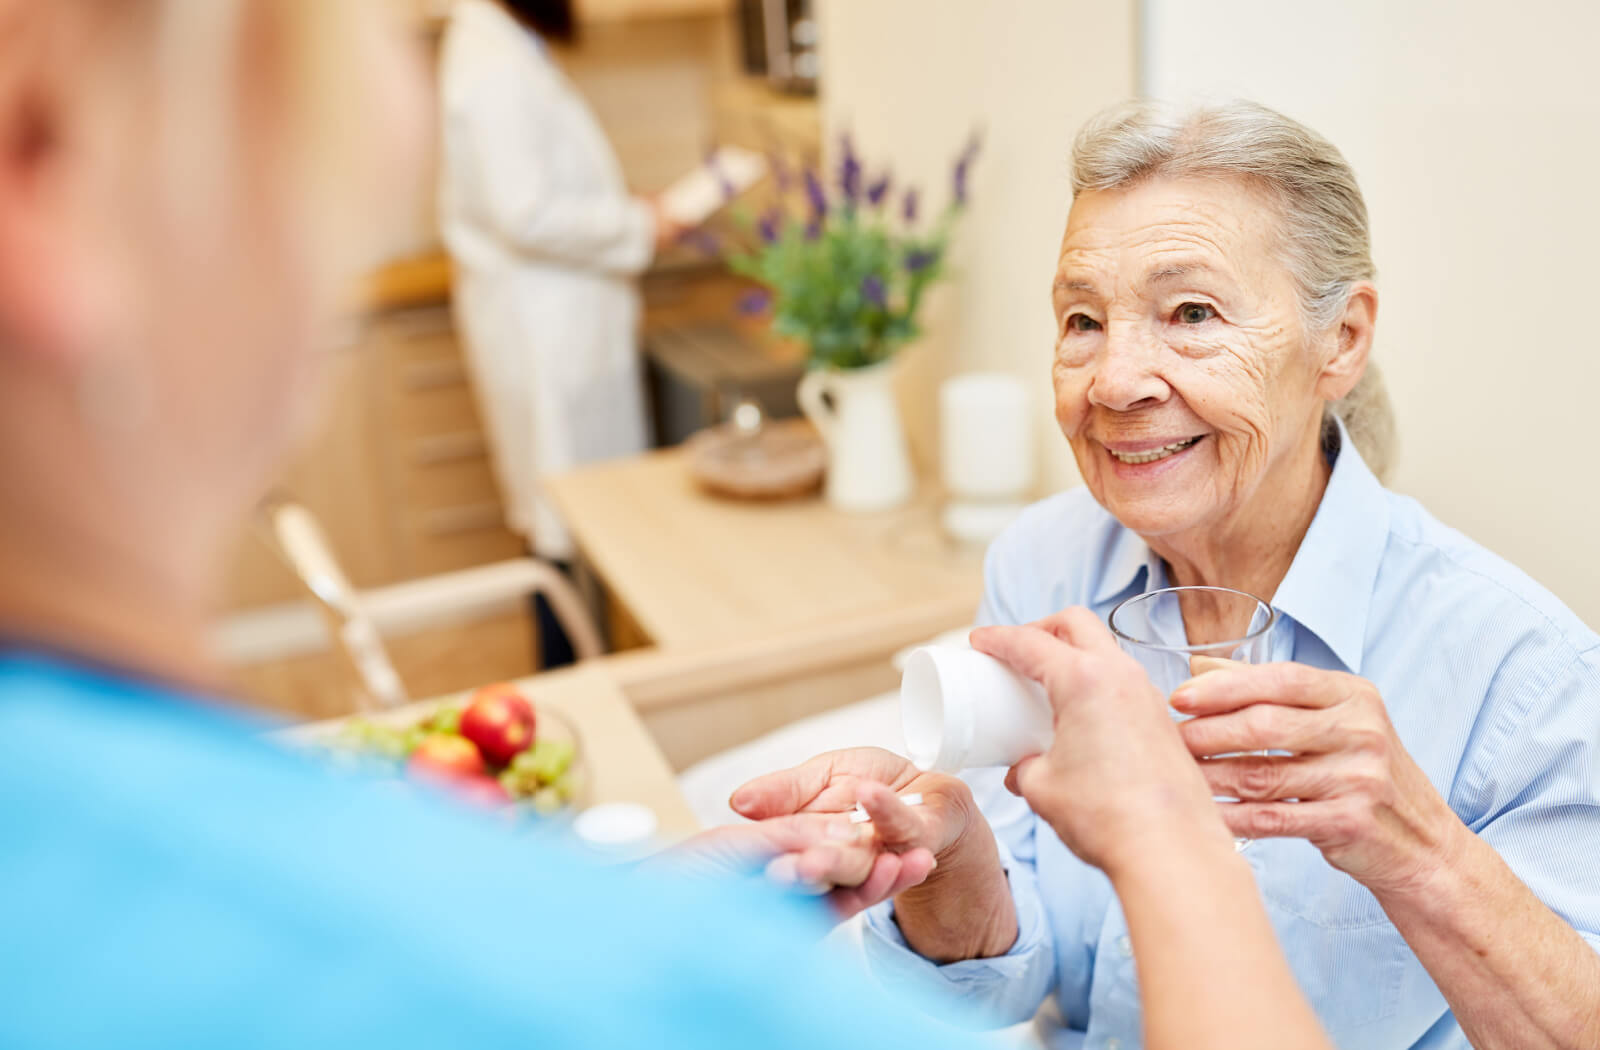 An older adult woman receiving her medicine from an assisted living staff.